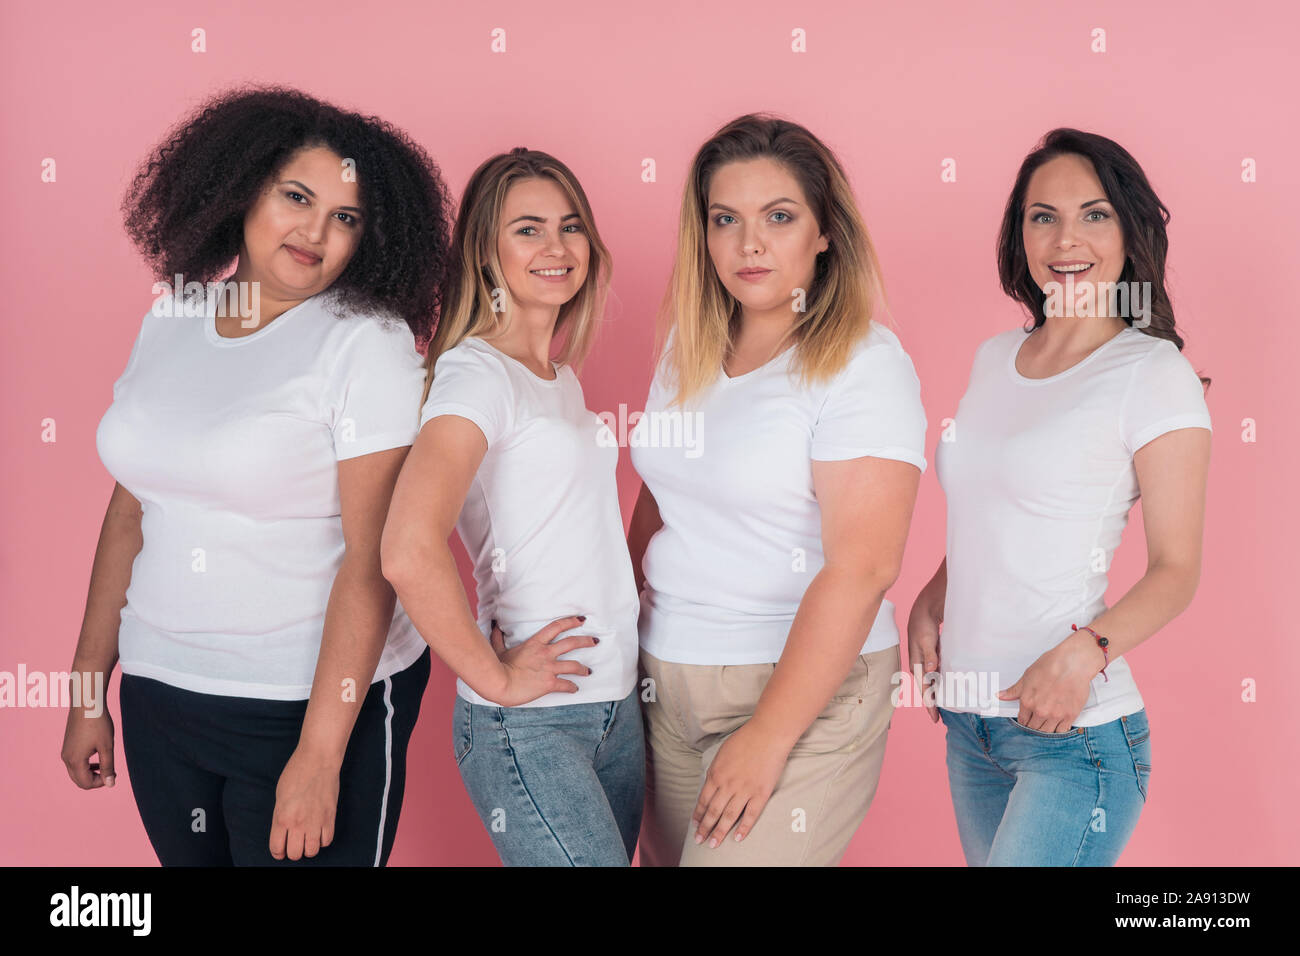 Two plus-size models and two skinny girls in white t-shirts. Design on white women's t-shirts Stock Photo